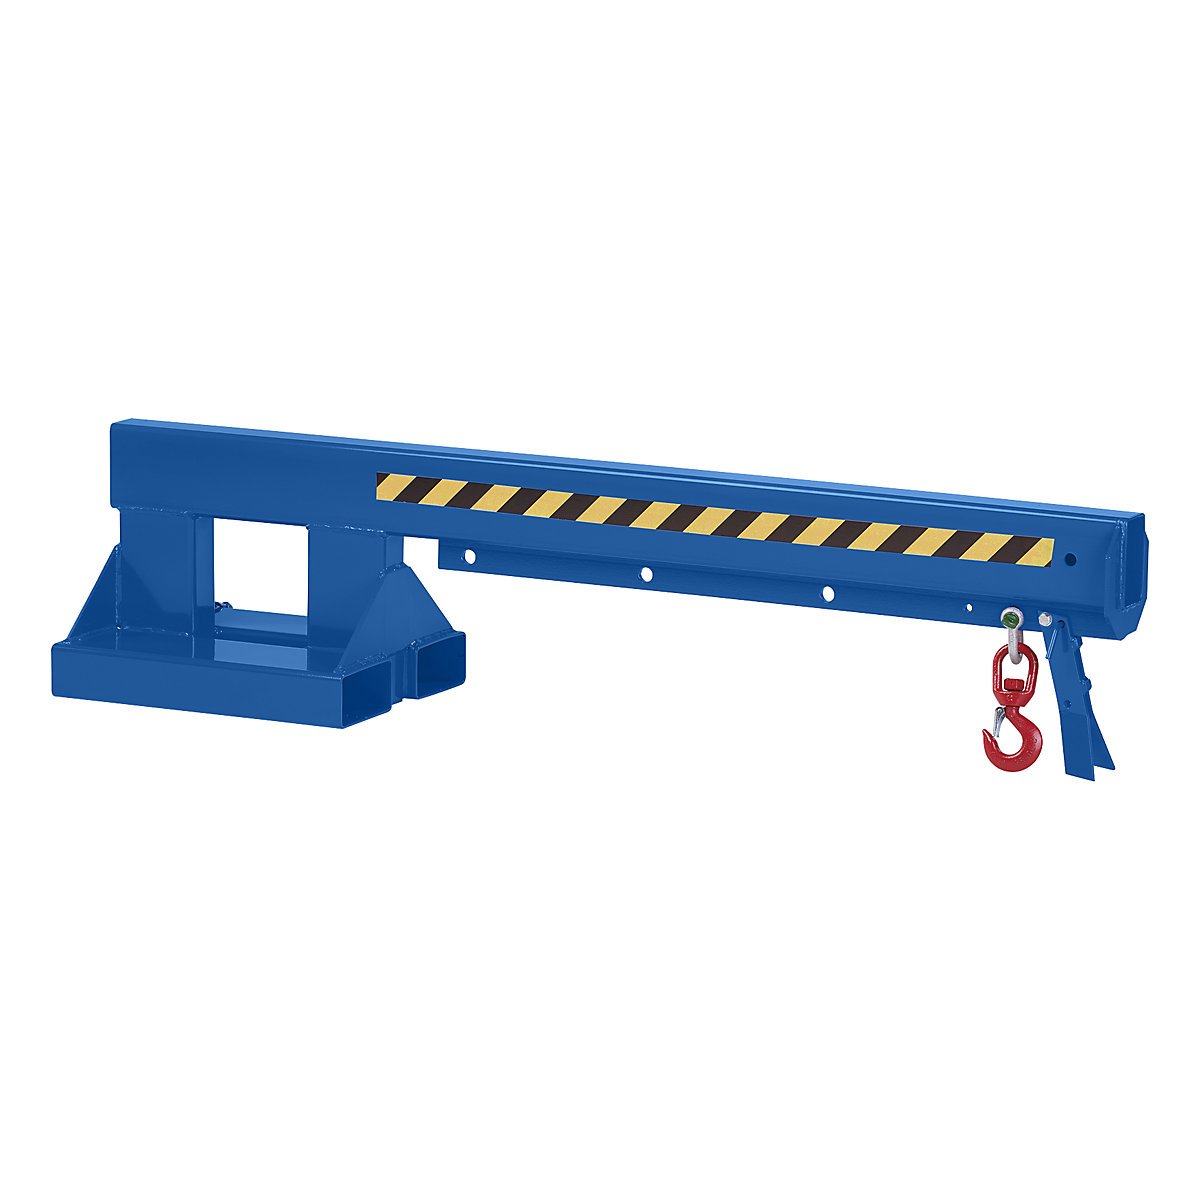 Telescopic loader – eurokraft pro, fixed length, max. load 650 – 2000 kg, painted blue